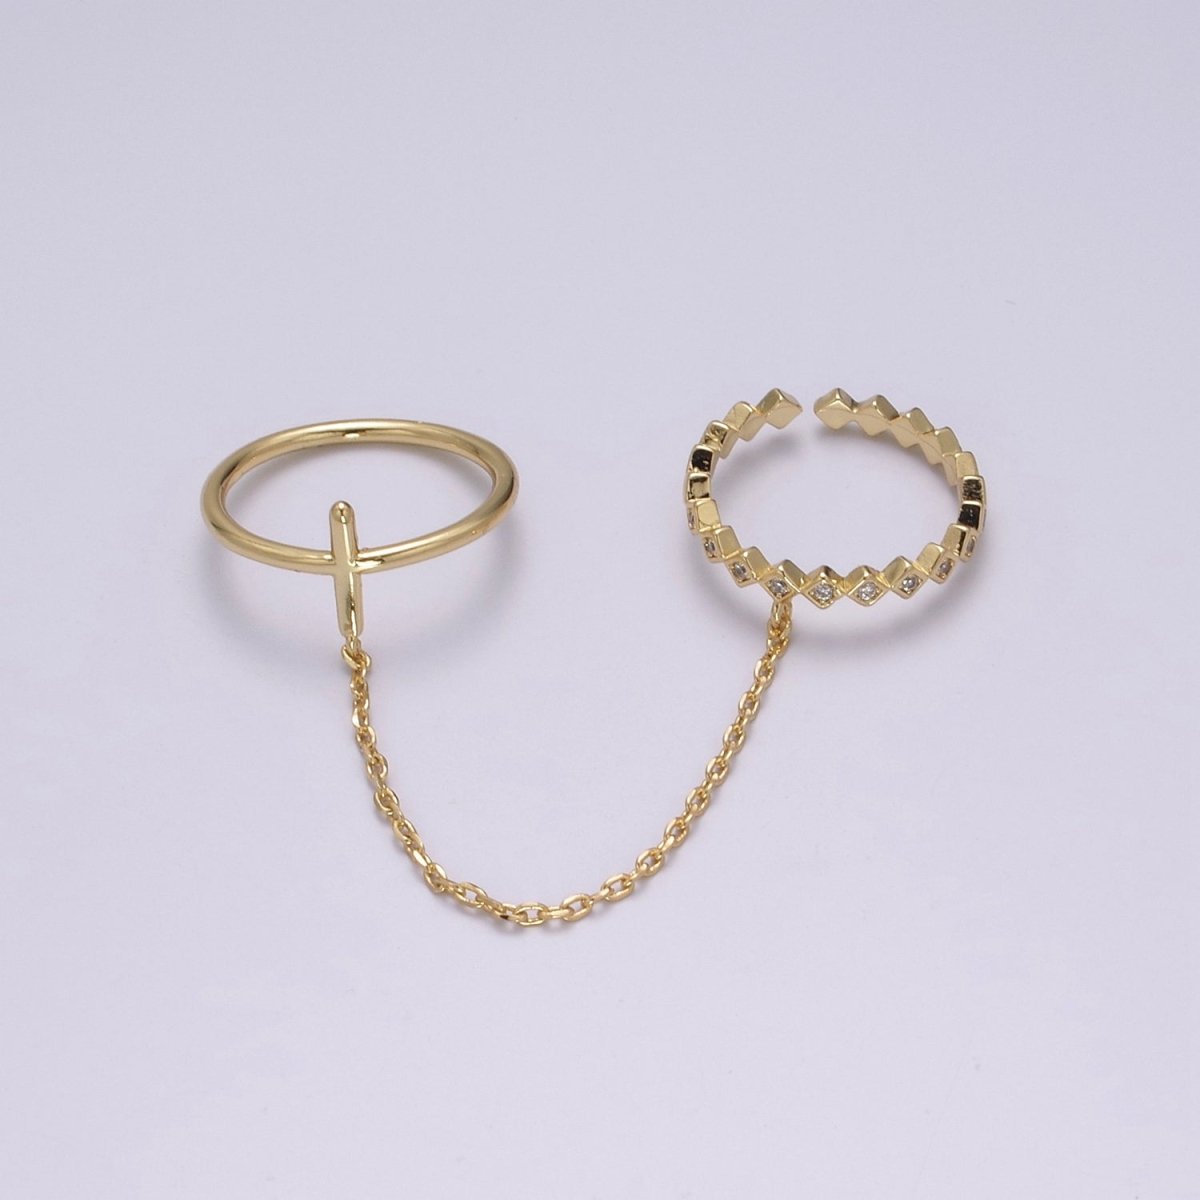 Double ring with chain, Adjustable ring, Stacking ring, Gold chain ring, Fashion ring, Minimalist Jewelry U-191 - DLUXCA